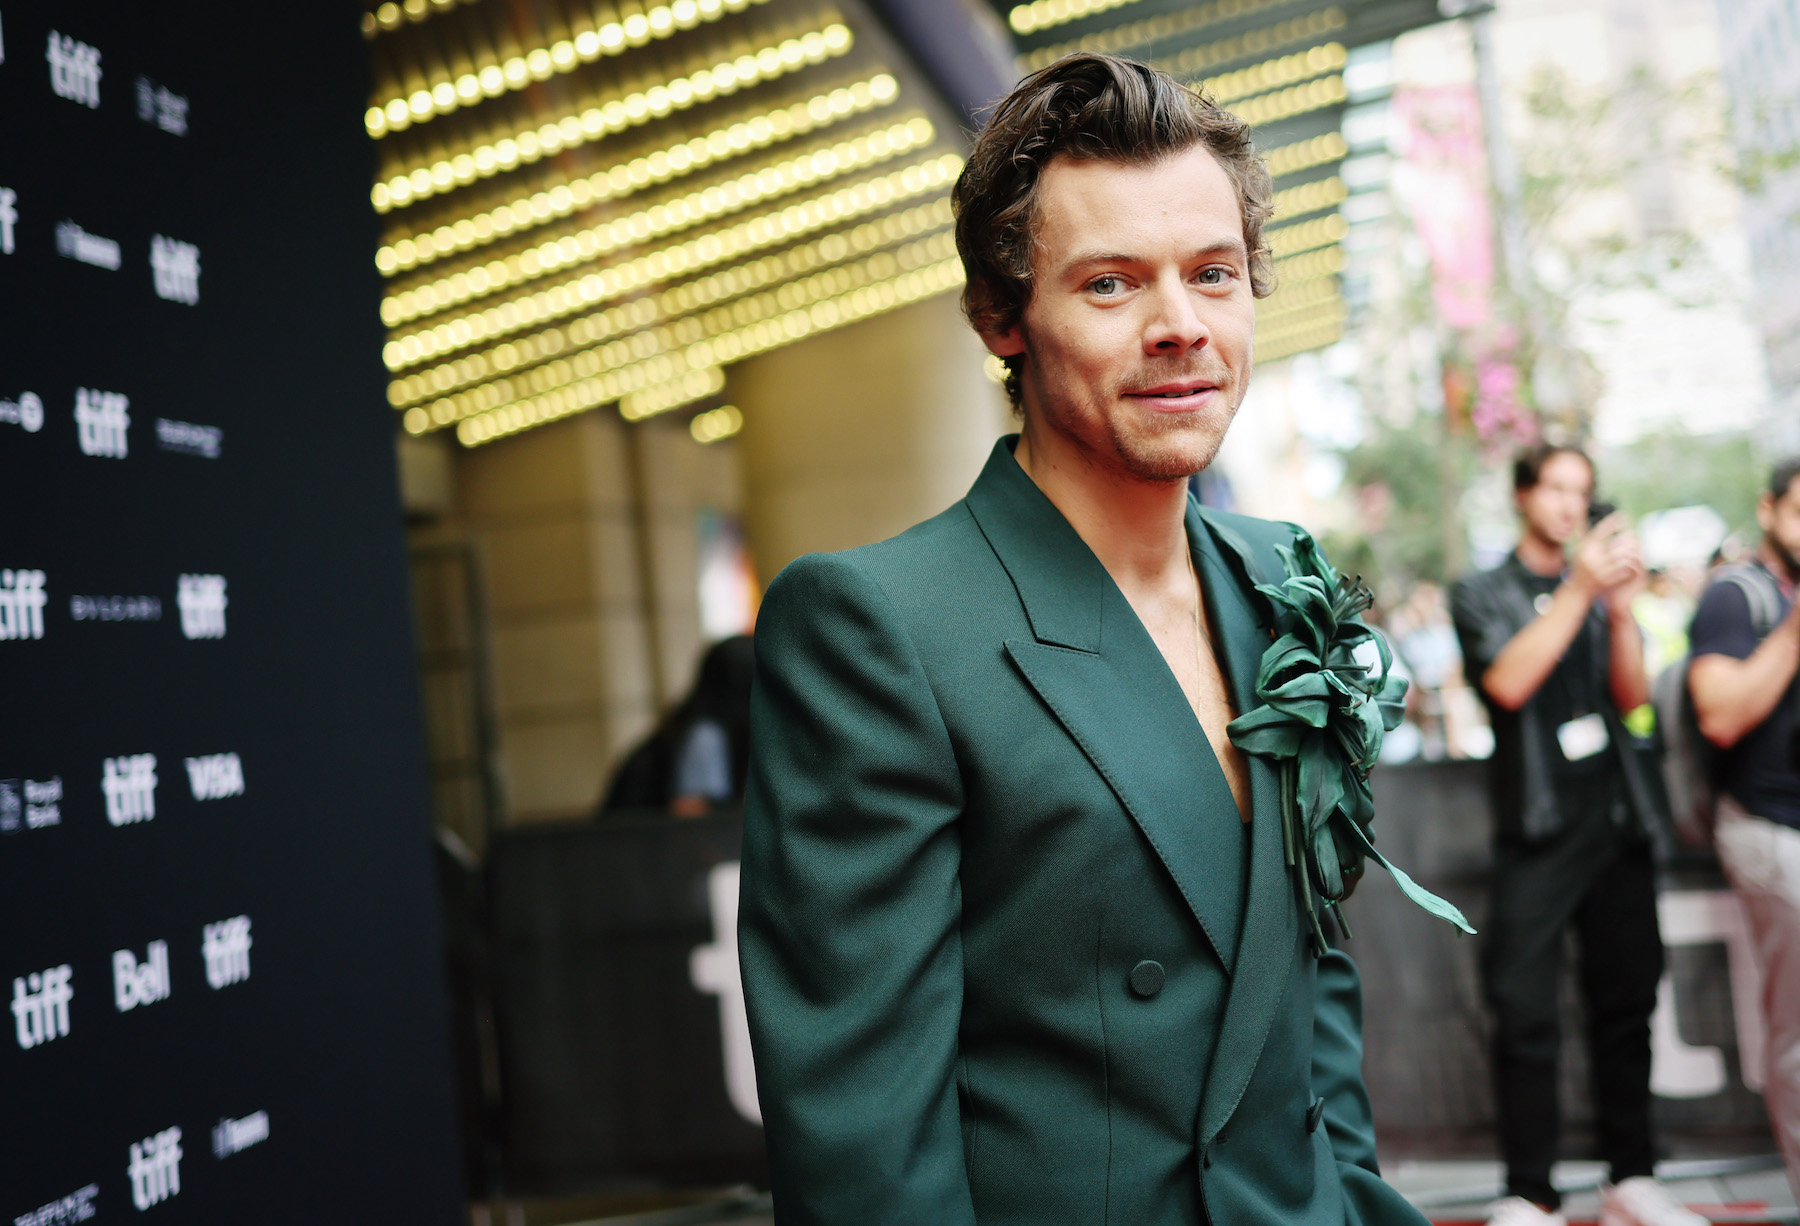 Harry Styles, who shares a record with Prince, Beyoncé, and Eminem, wearing a green suit.